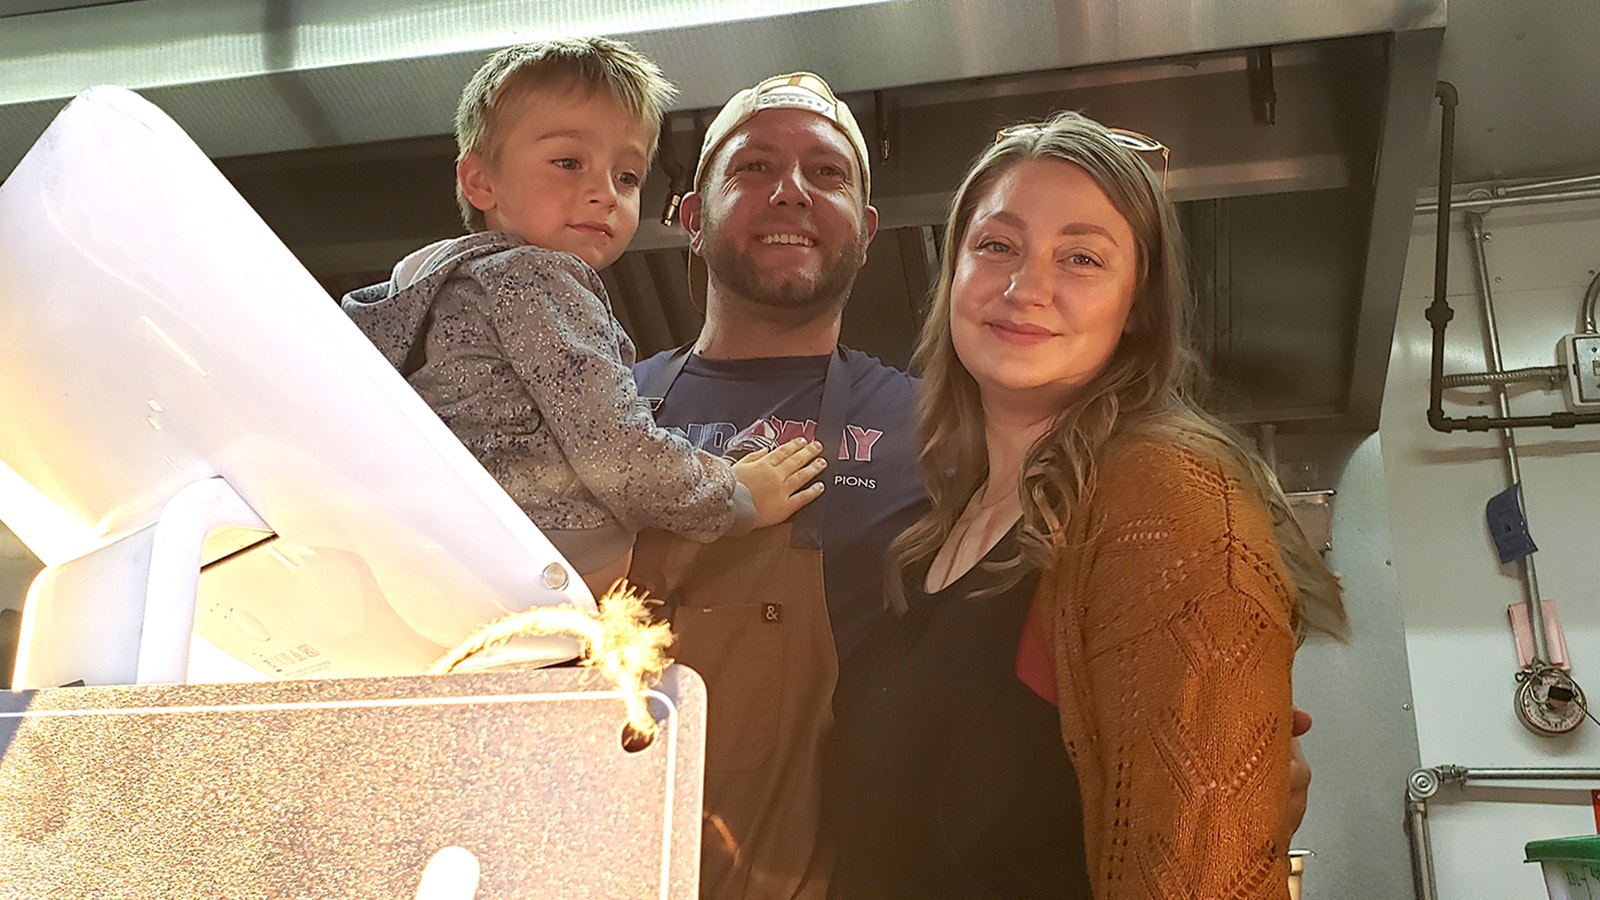 Daniel and Shelby Krugman, pictured here with their son, own Olio Food Truck.